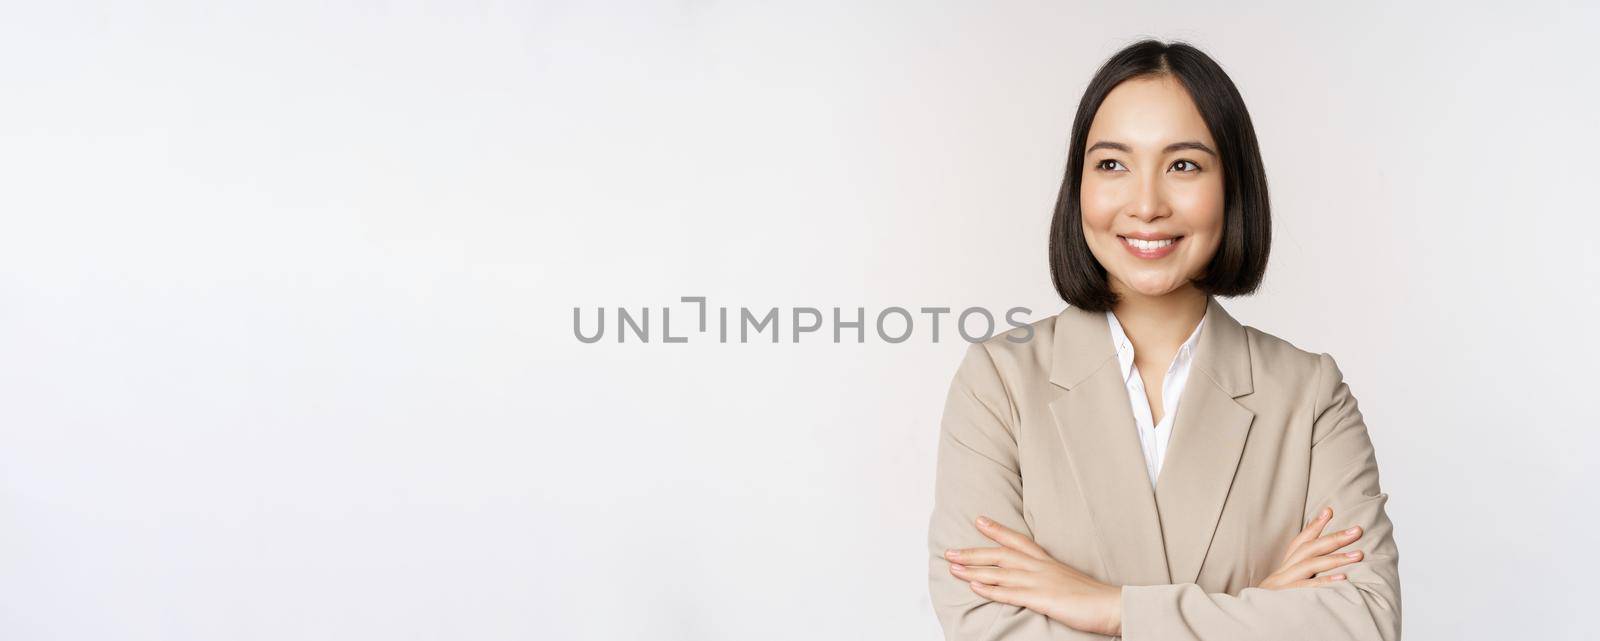 Confident female entrepreneur, asian business woman standing in power pose, professional business person, cross arms on chest, standing over white background.